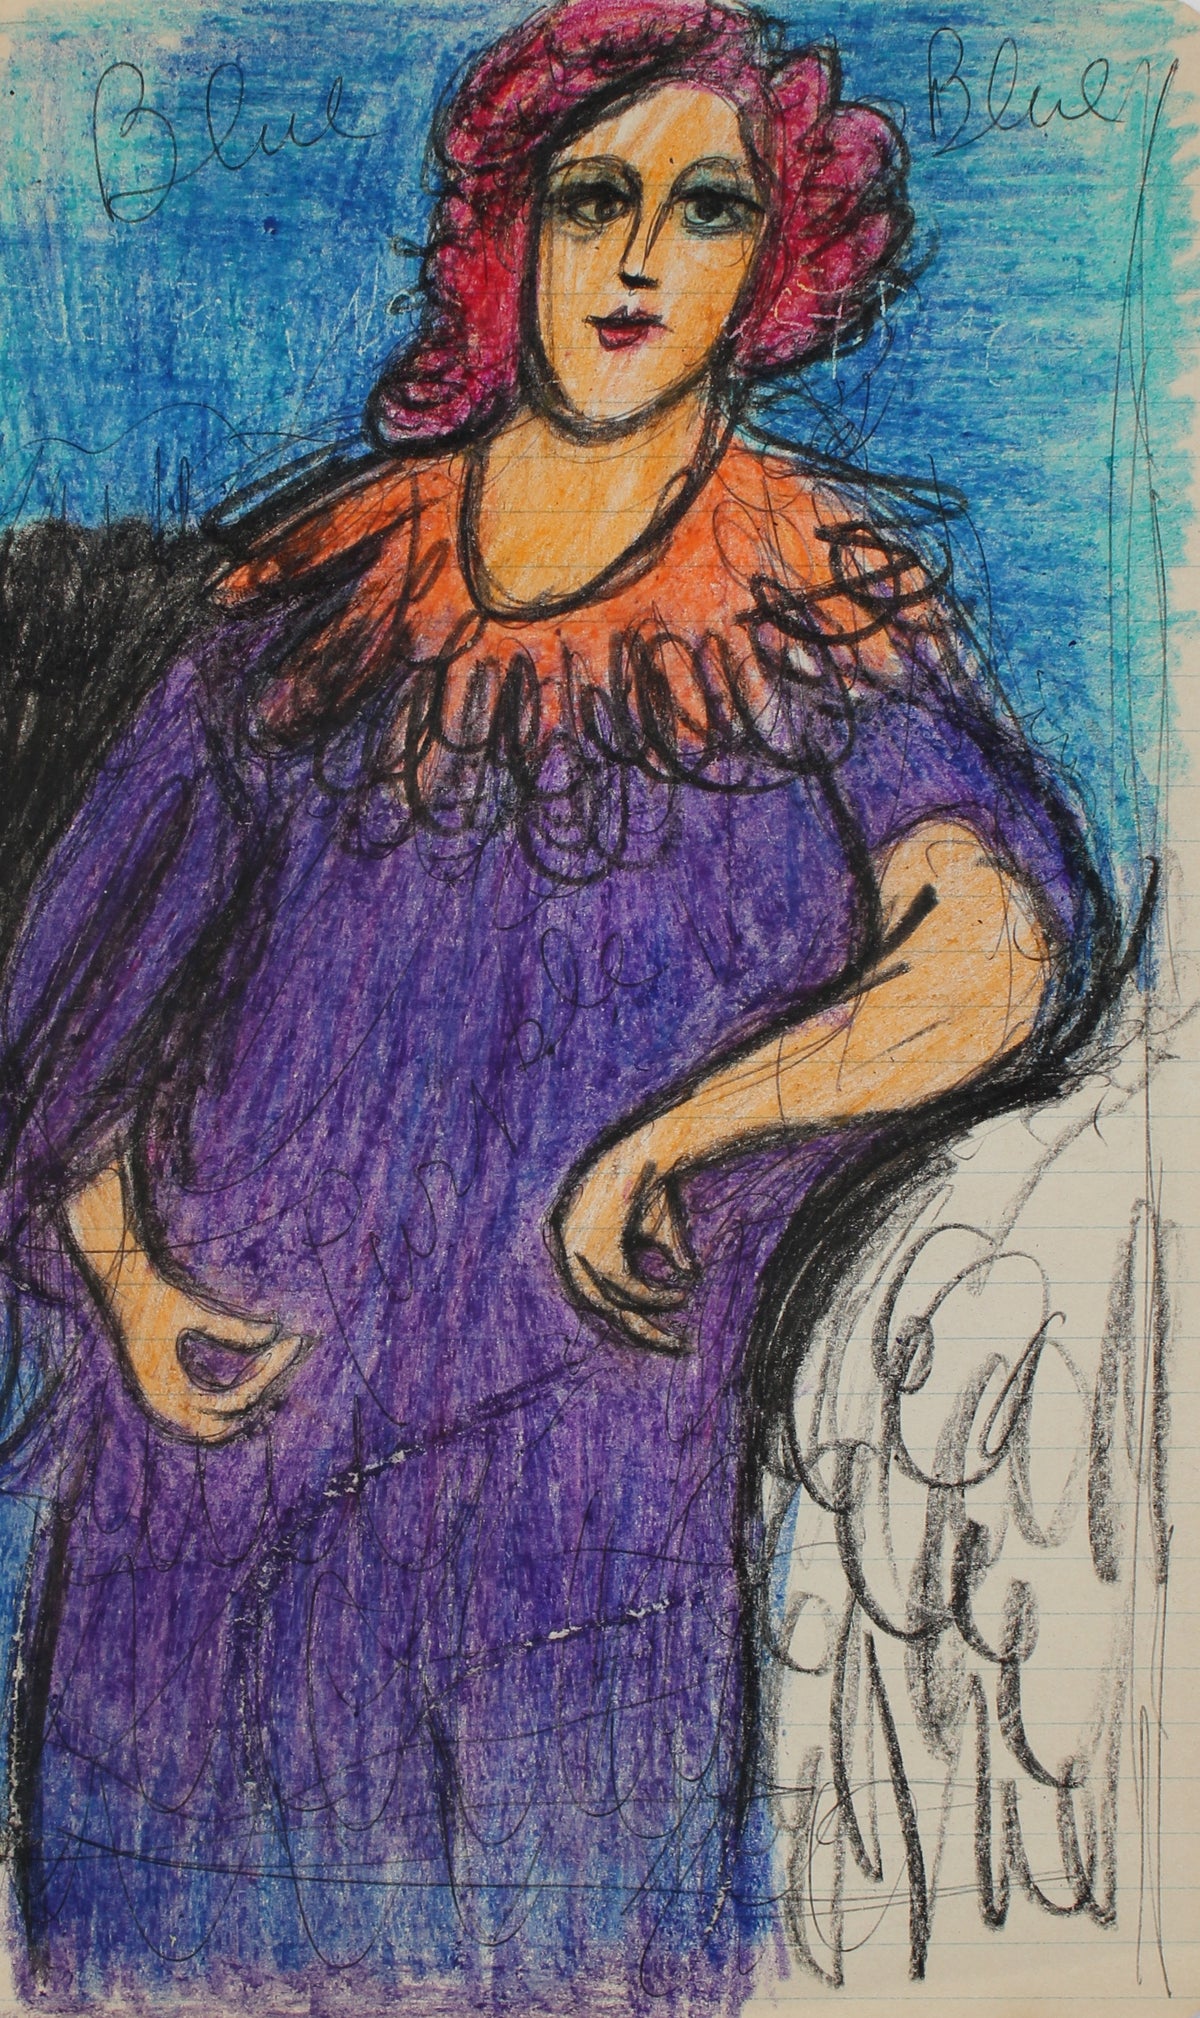 Colorful Portrait of a Woman&lt;br&gt;Early-Mid 20th Century Ink and Wax Crayon on Paper&lt;br&gt;&lt;br&gt;#95085